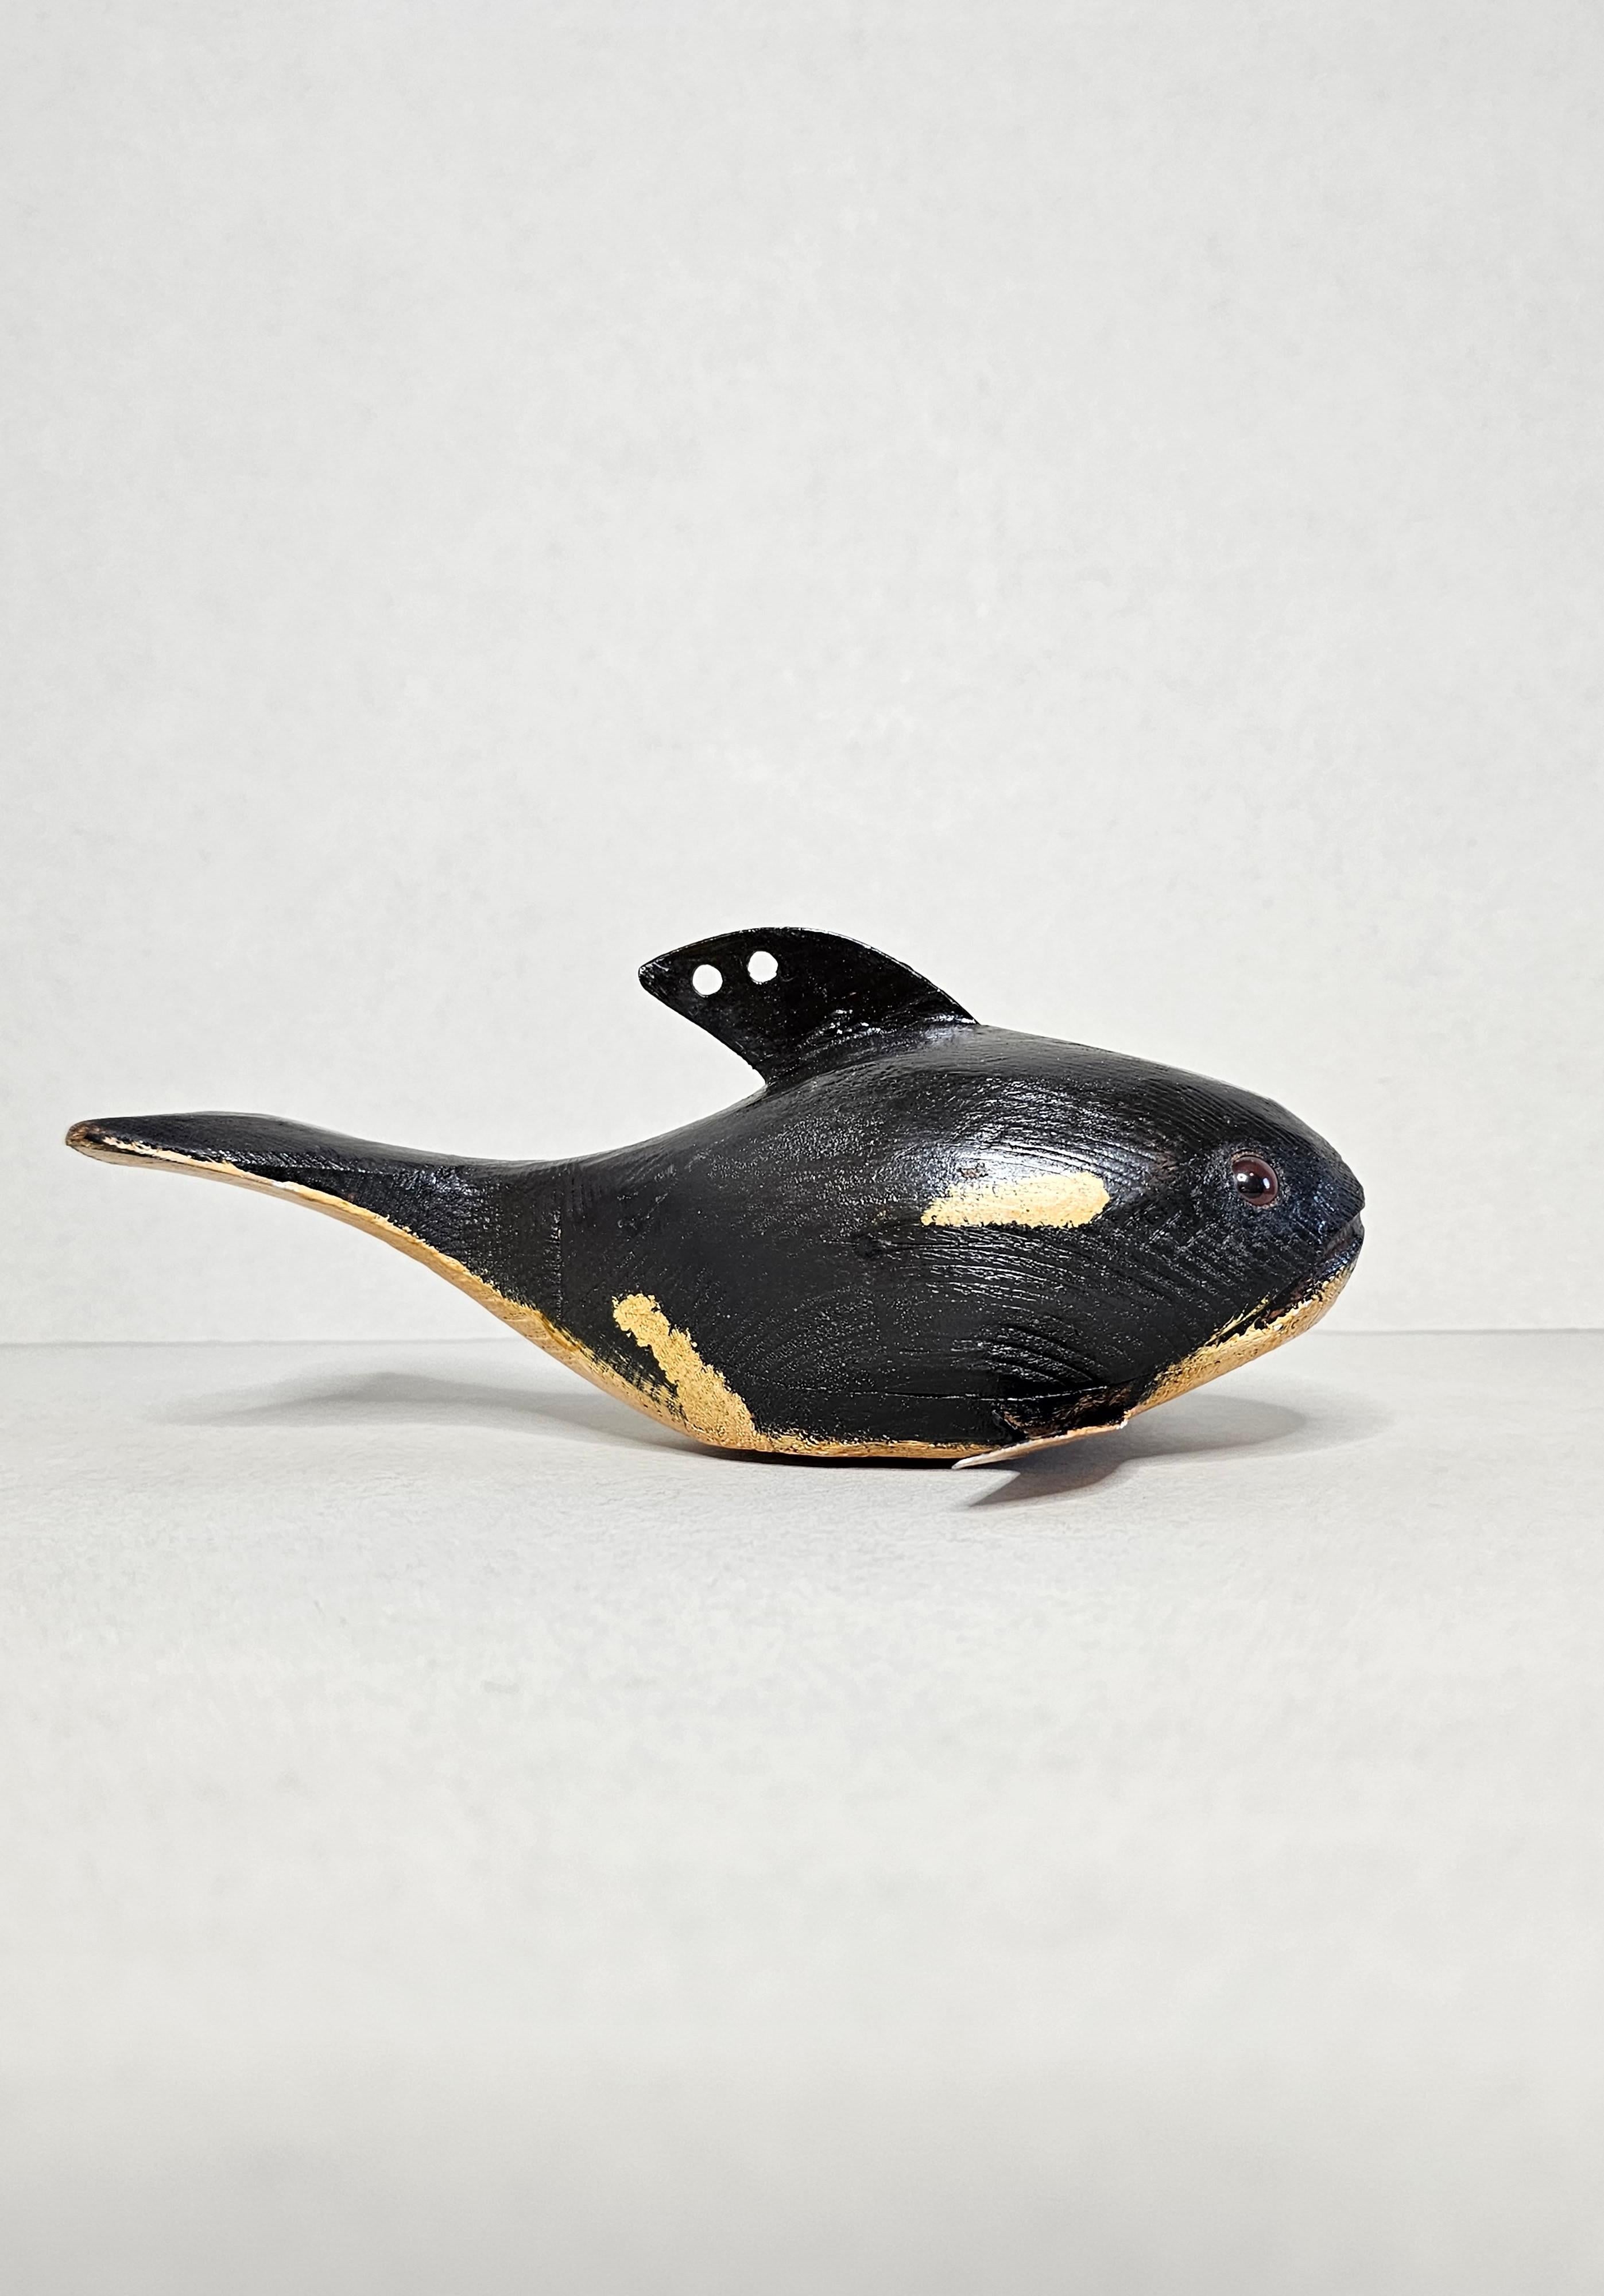 Duluth Fish Decoy American Folk Art Carved Painted Orca Killer Whale Sculpture For Sale 6